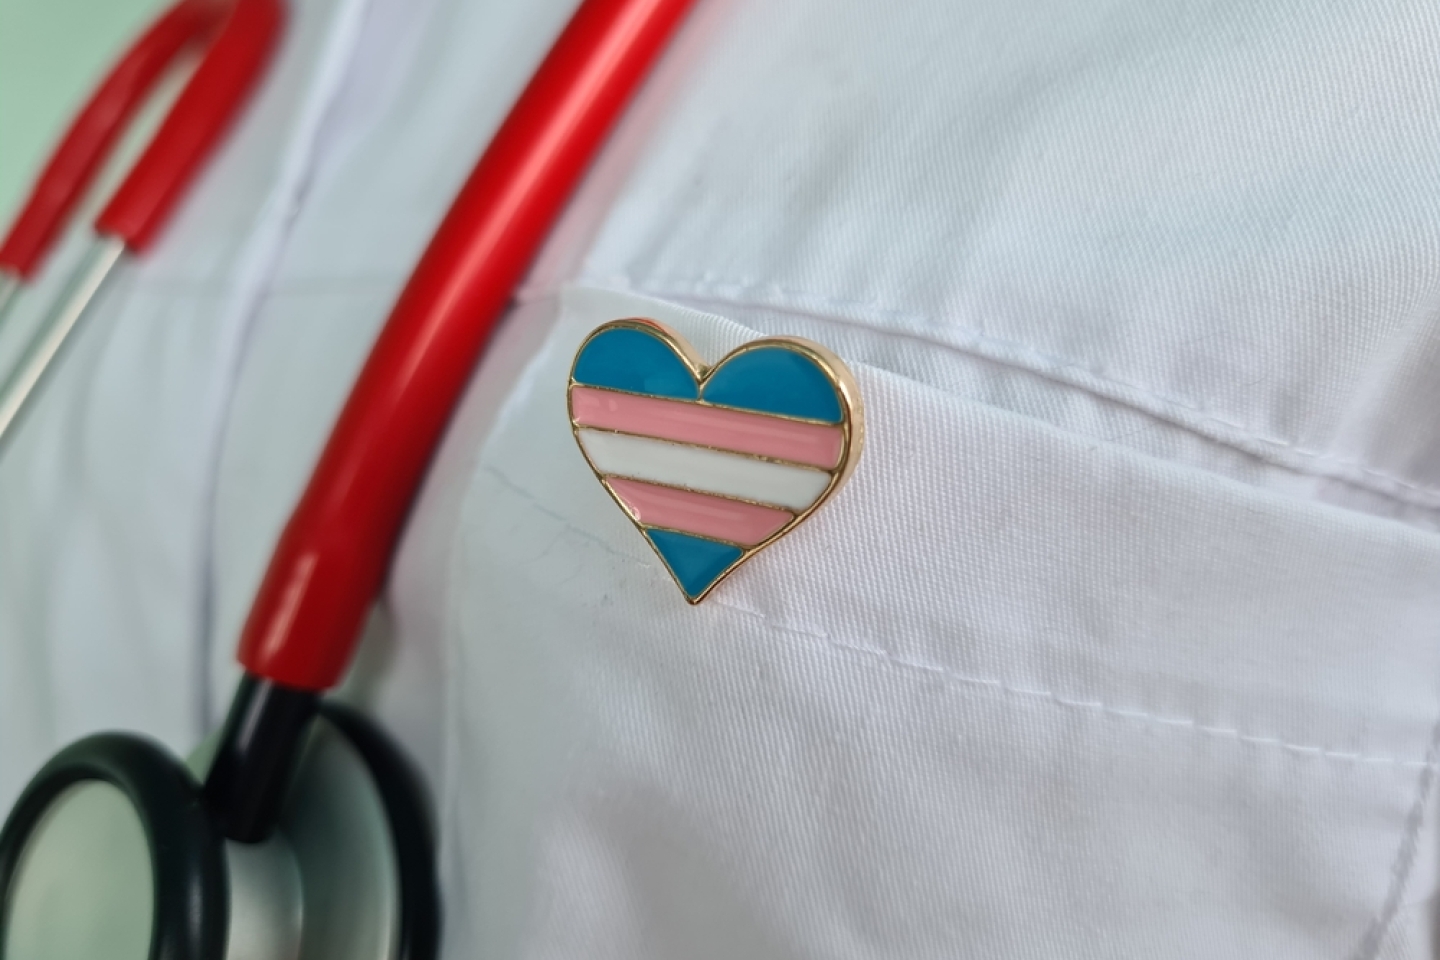 Transgender LGBT symbol stethoscope with rainbow icon for rights and gender equality. Medical care insurance and doctor